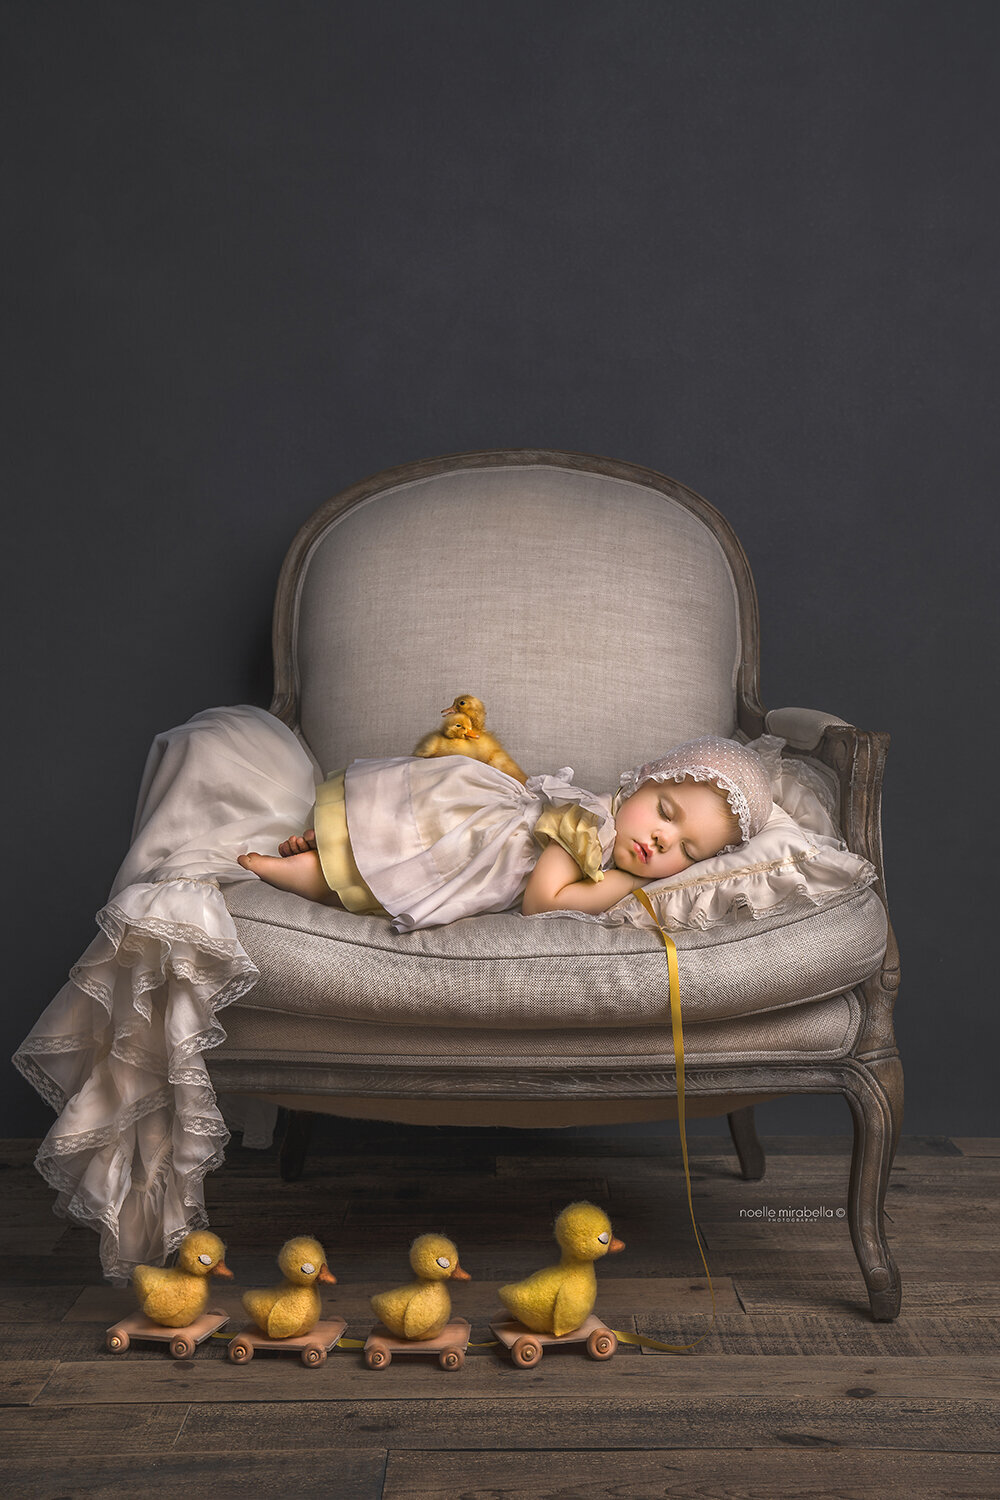 Girl in a Vintage dress sleeping with baby ducklings in a vintage french chair. Vintage style children's portrait. Duckling pull toy.